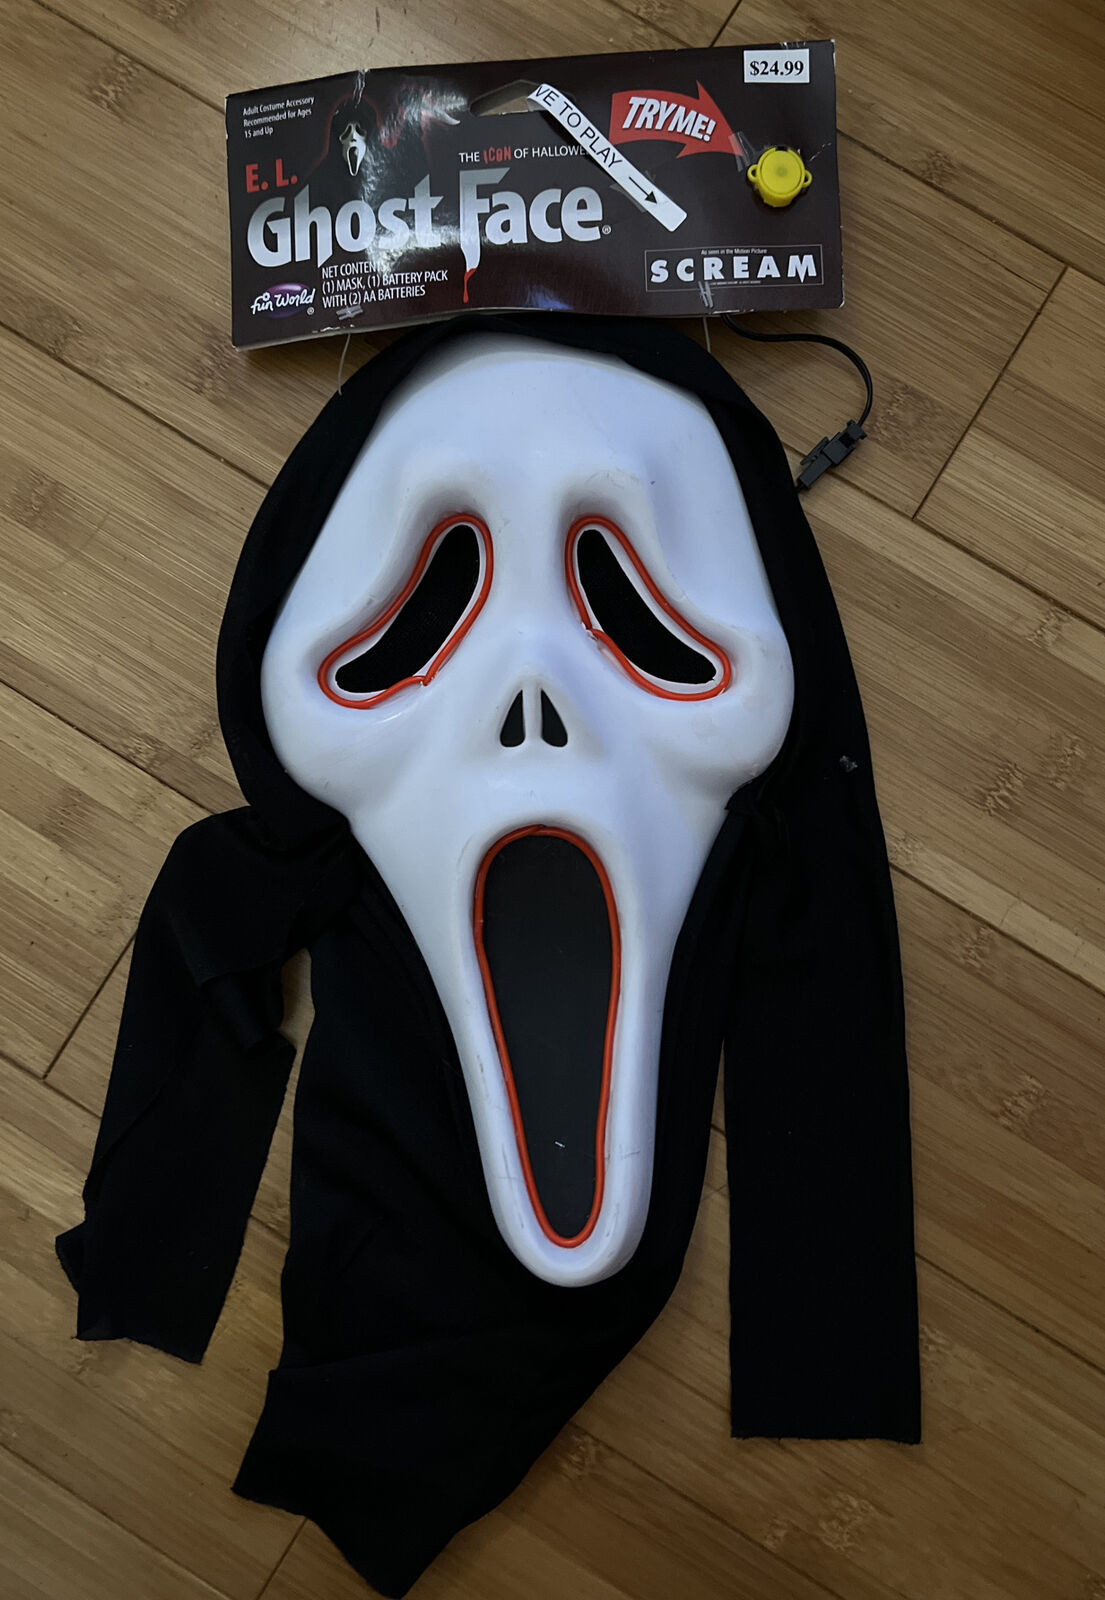 E.L. Ghost Face Halloween Mask From The Movie Scream Lights Up